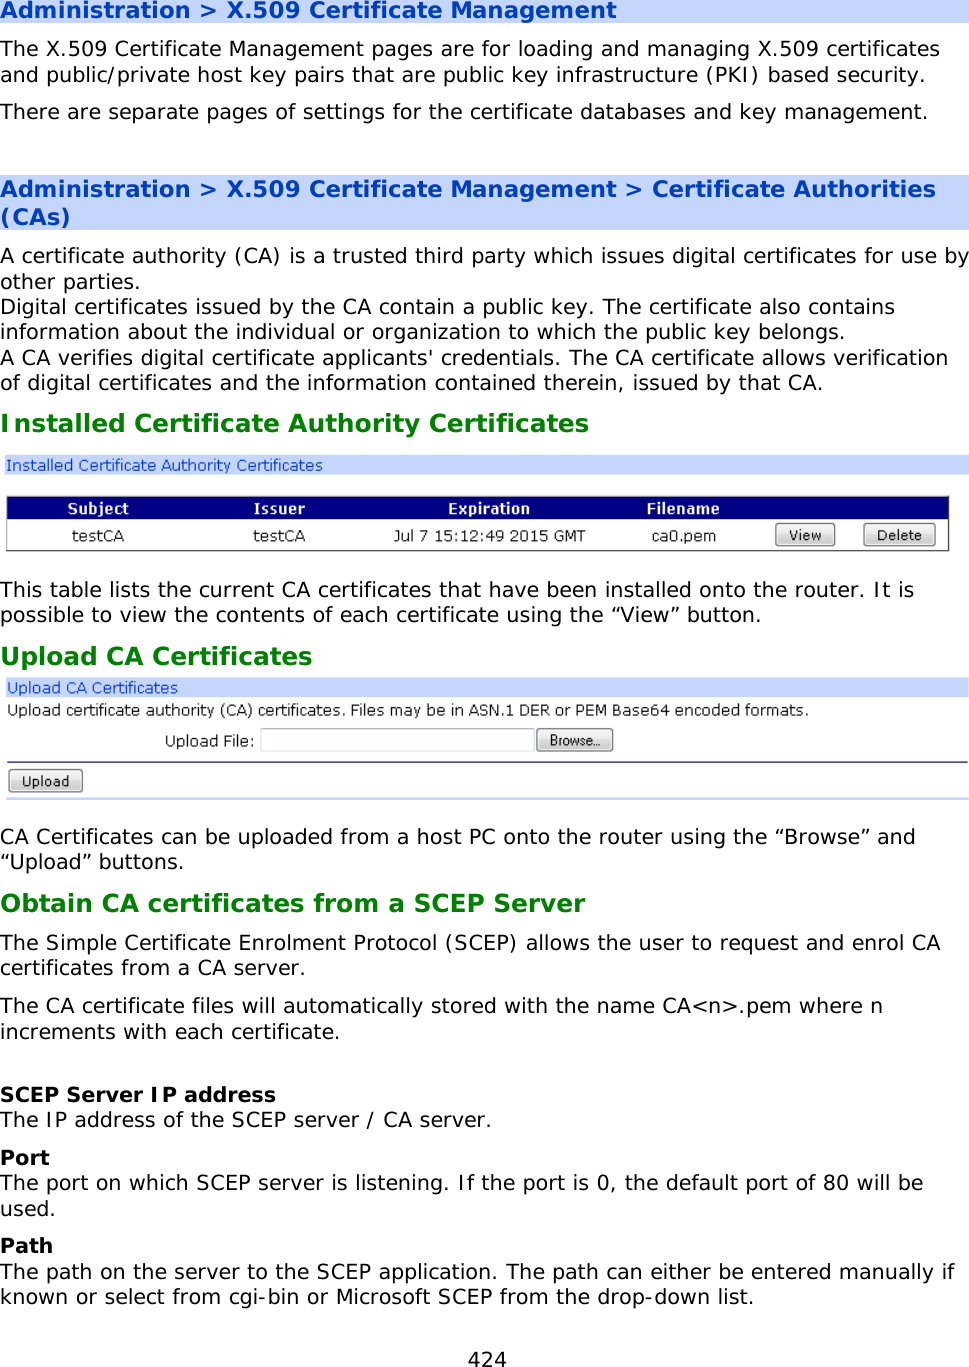 424  Administration &gt; X.509 Certificate Management The X.509 Certificate Management pages are for loading and managing X.509 certificates and public/private host key pairs that are public key infrastructure (PKI) based security. There are separate pages of settings for the certificate databases and key management.  Administration &gt; X.509 Certificate Management &gt; Certificate Authorities (CAs) A certificate authority (CA) is a trusted third party which issues digital certificates for use by other parties.  Digital certificates issued by the CA contain a public key. The certificate also contains information about the individual or organization to which the public key belongs.  A CA verifies digital certificate applicants&apos; credentials. The CA certificate allows verification of digital certificates and the information contained therein, issued by that CA. Installed Certificate Authority Certificates  This table lists the current CA certificates that have been installed onto the router. It is possible to view the contents of each certificate using the “View” button. Upload CA Certificates   CA Certificates can be uploaded from a host PC onto the router using the “Browse” and “Upload” buttons. Obtain CA certificates from a SCEP Server The Simple Certificate Enrolment Protocol (SCEP) allows the user to request and enrol CA certificates from a CA server. The CA certificate files will automatically stored with the name CA&lt;n&gt;.pem where n increments with each certificate.  SCEP Server IP address The IP address of the SCEP server / CA server. Port The port on which SCEP server is listening. If the port is 0, the default port of 80 will be used. Path The path on the server to the SCEP application. The path can either be entered manually if known or select from cgi-bin or Microsoft SCEP from the drop-down list. 